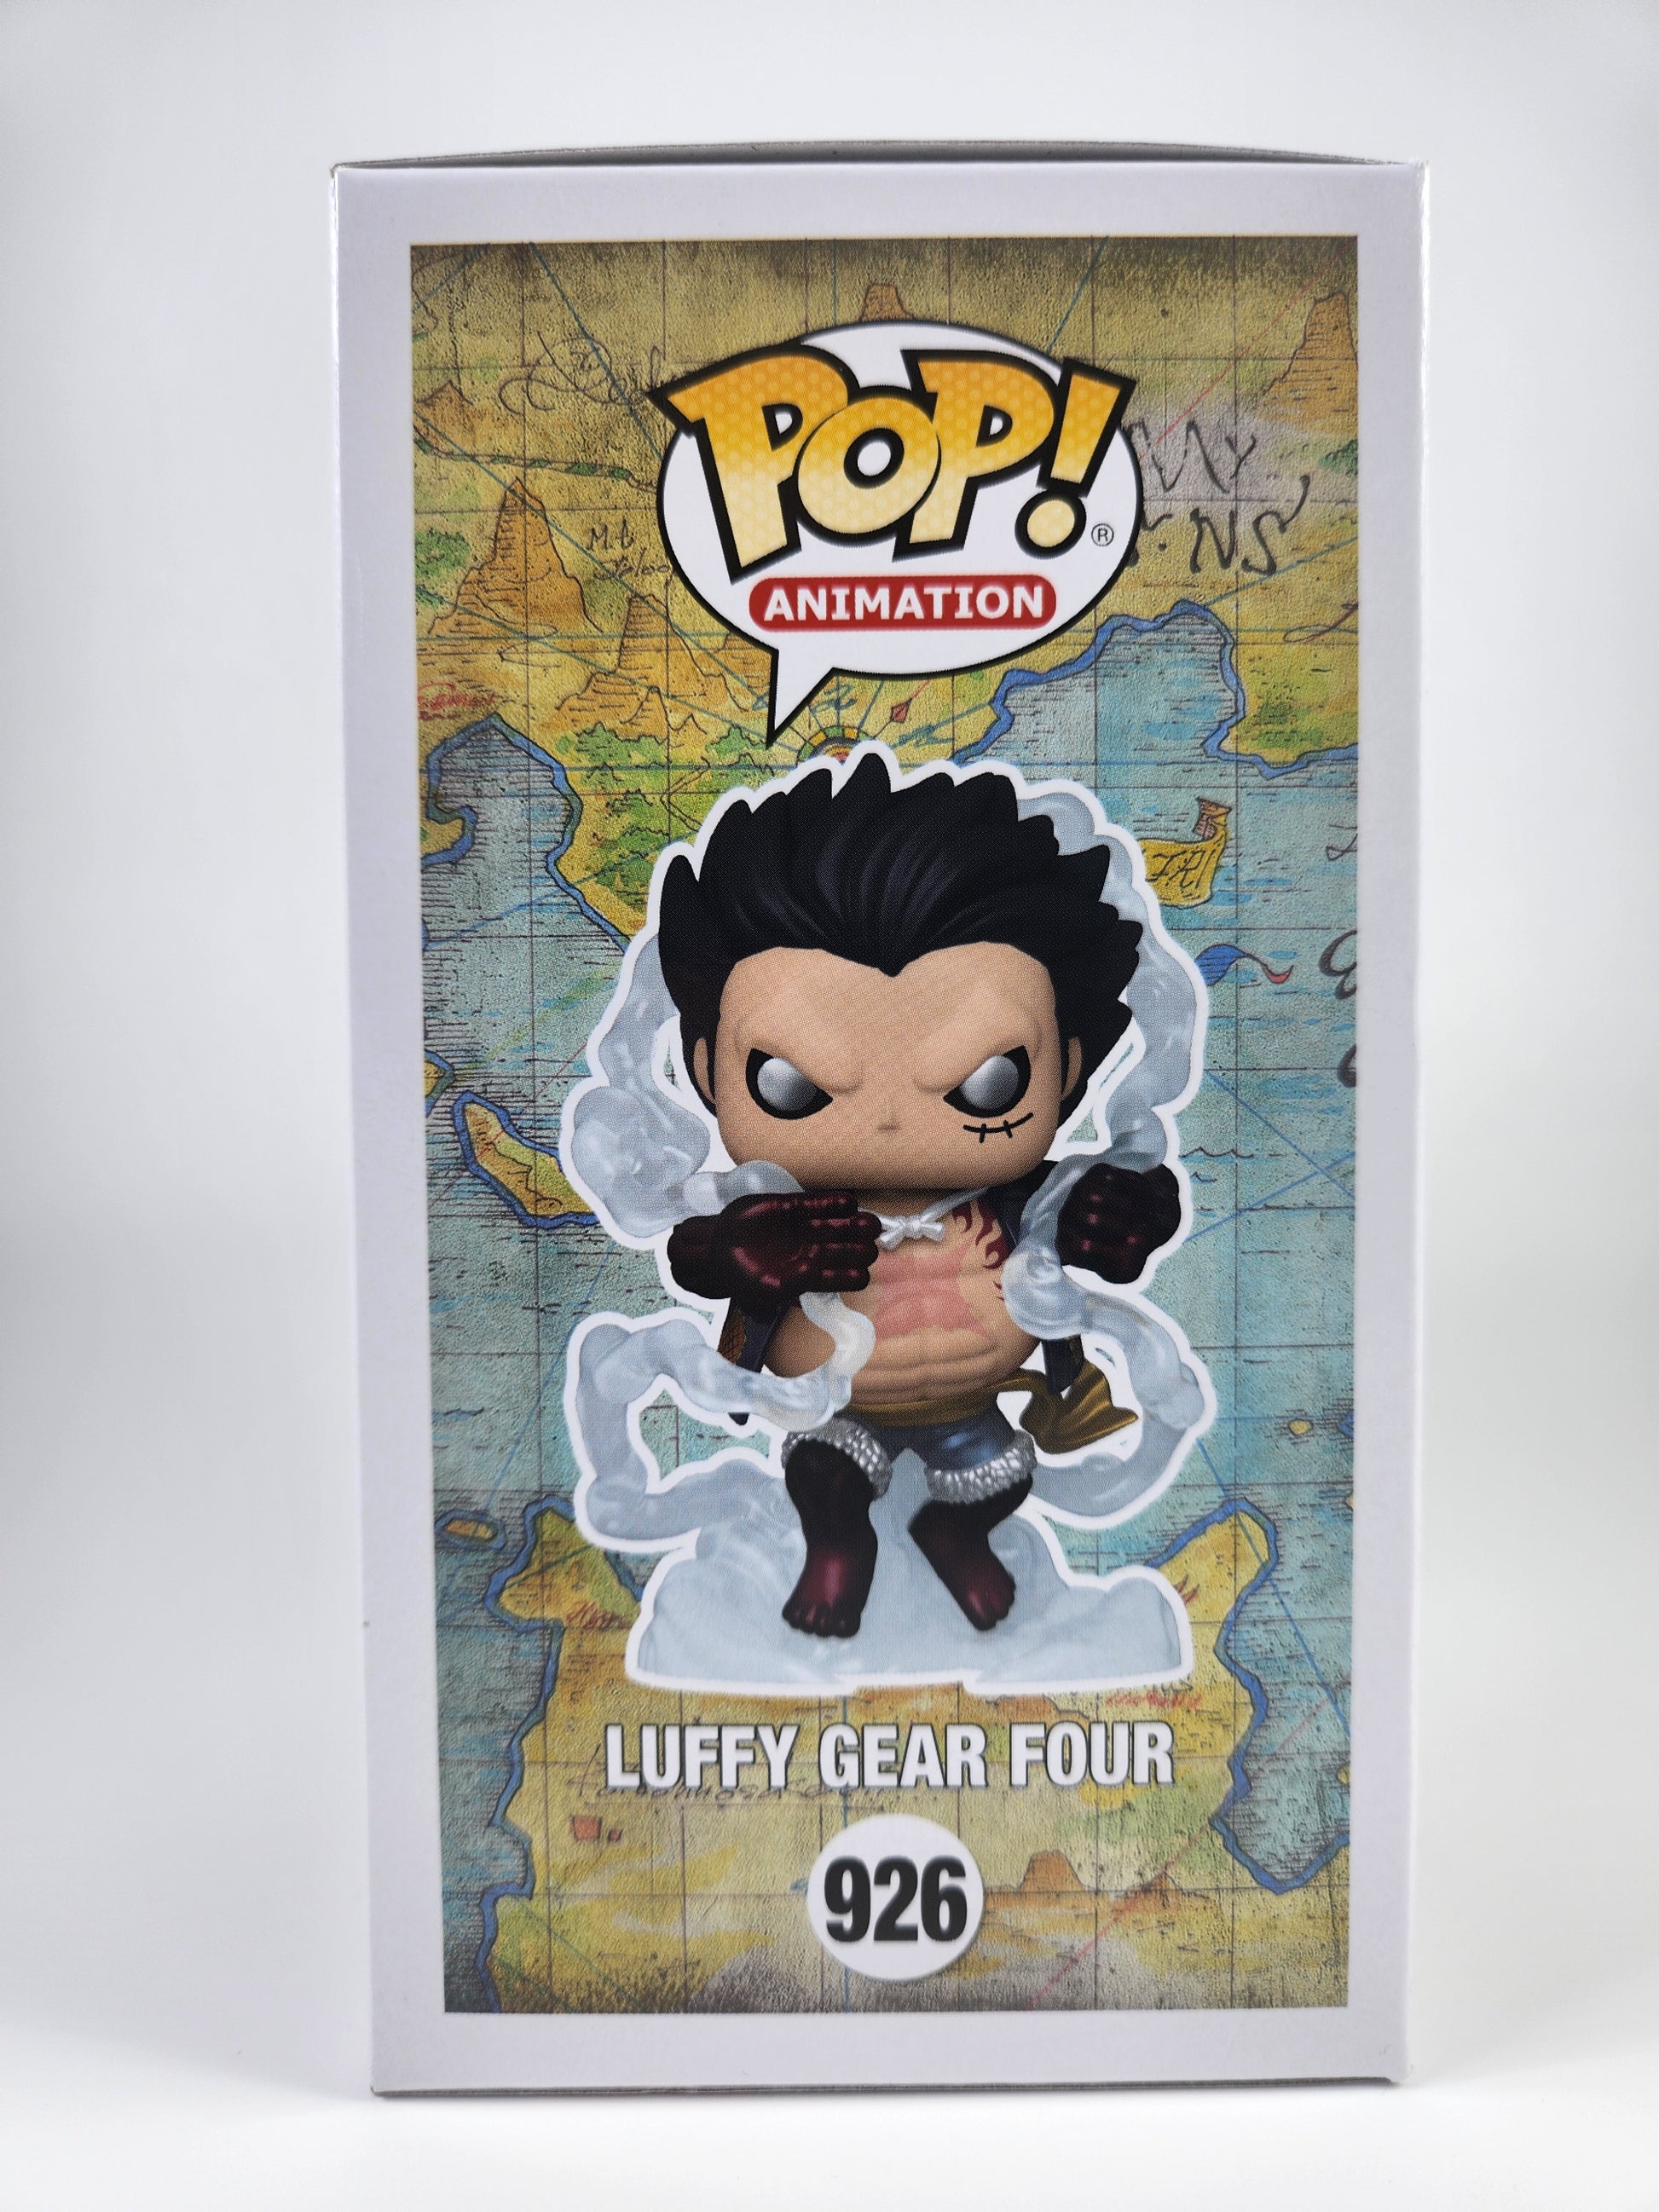 One Piece Luffy Gear Four Special Edition POP! Animation figure